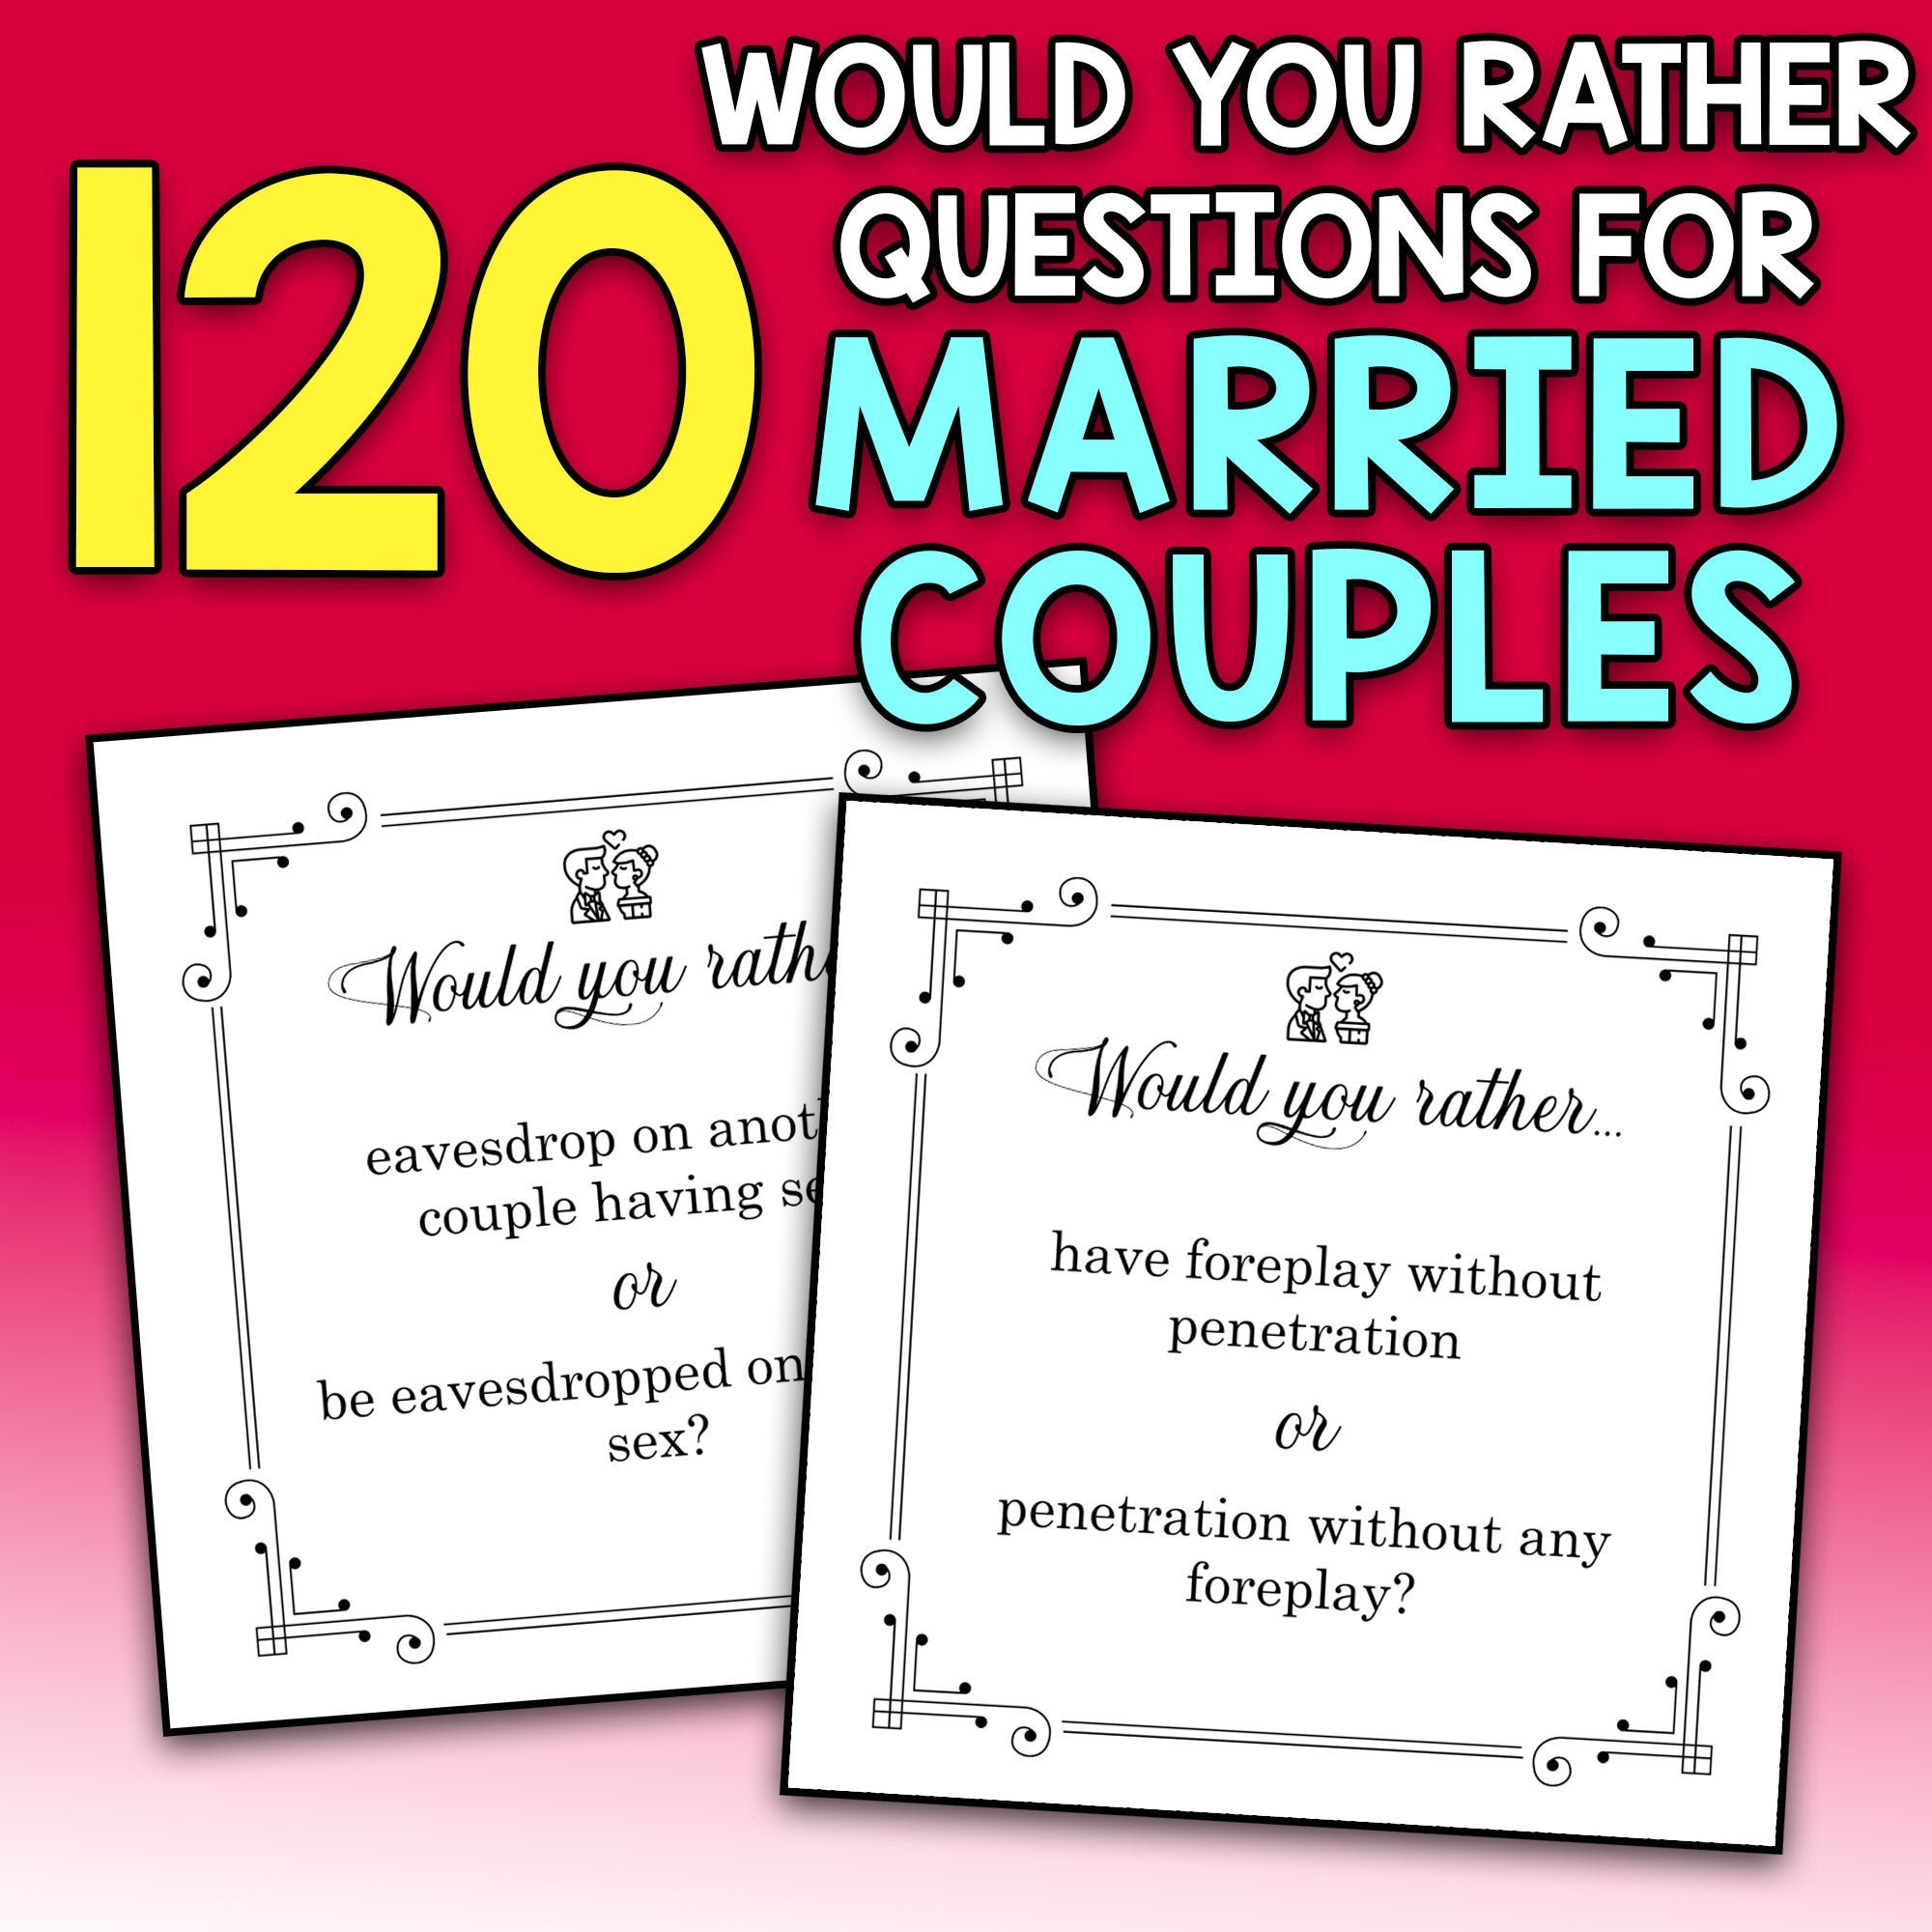 BEST VALUE 120 Would You Rather Questions for Married Couples